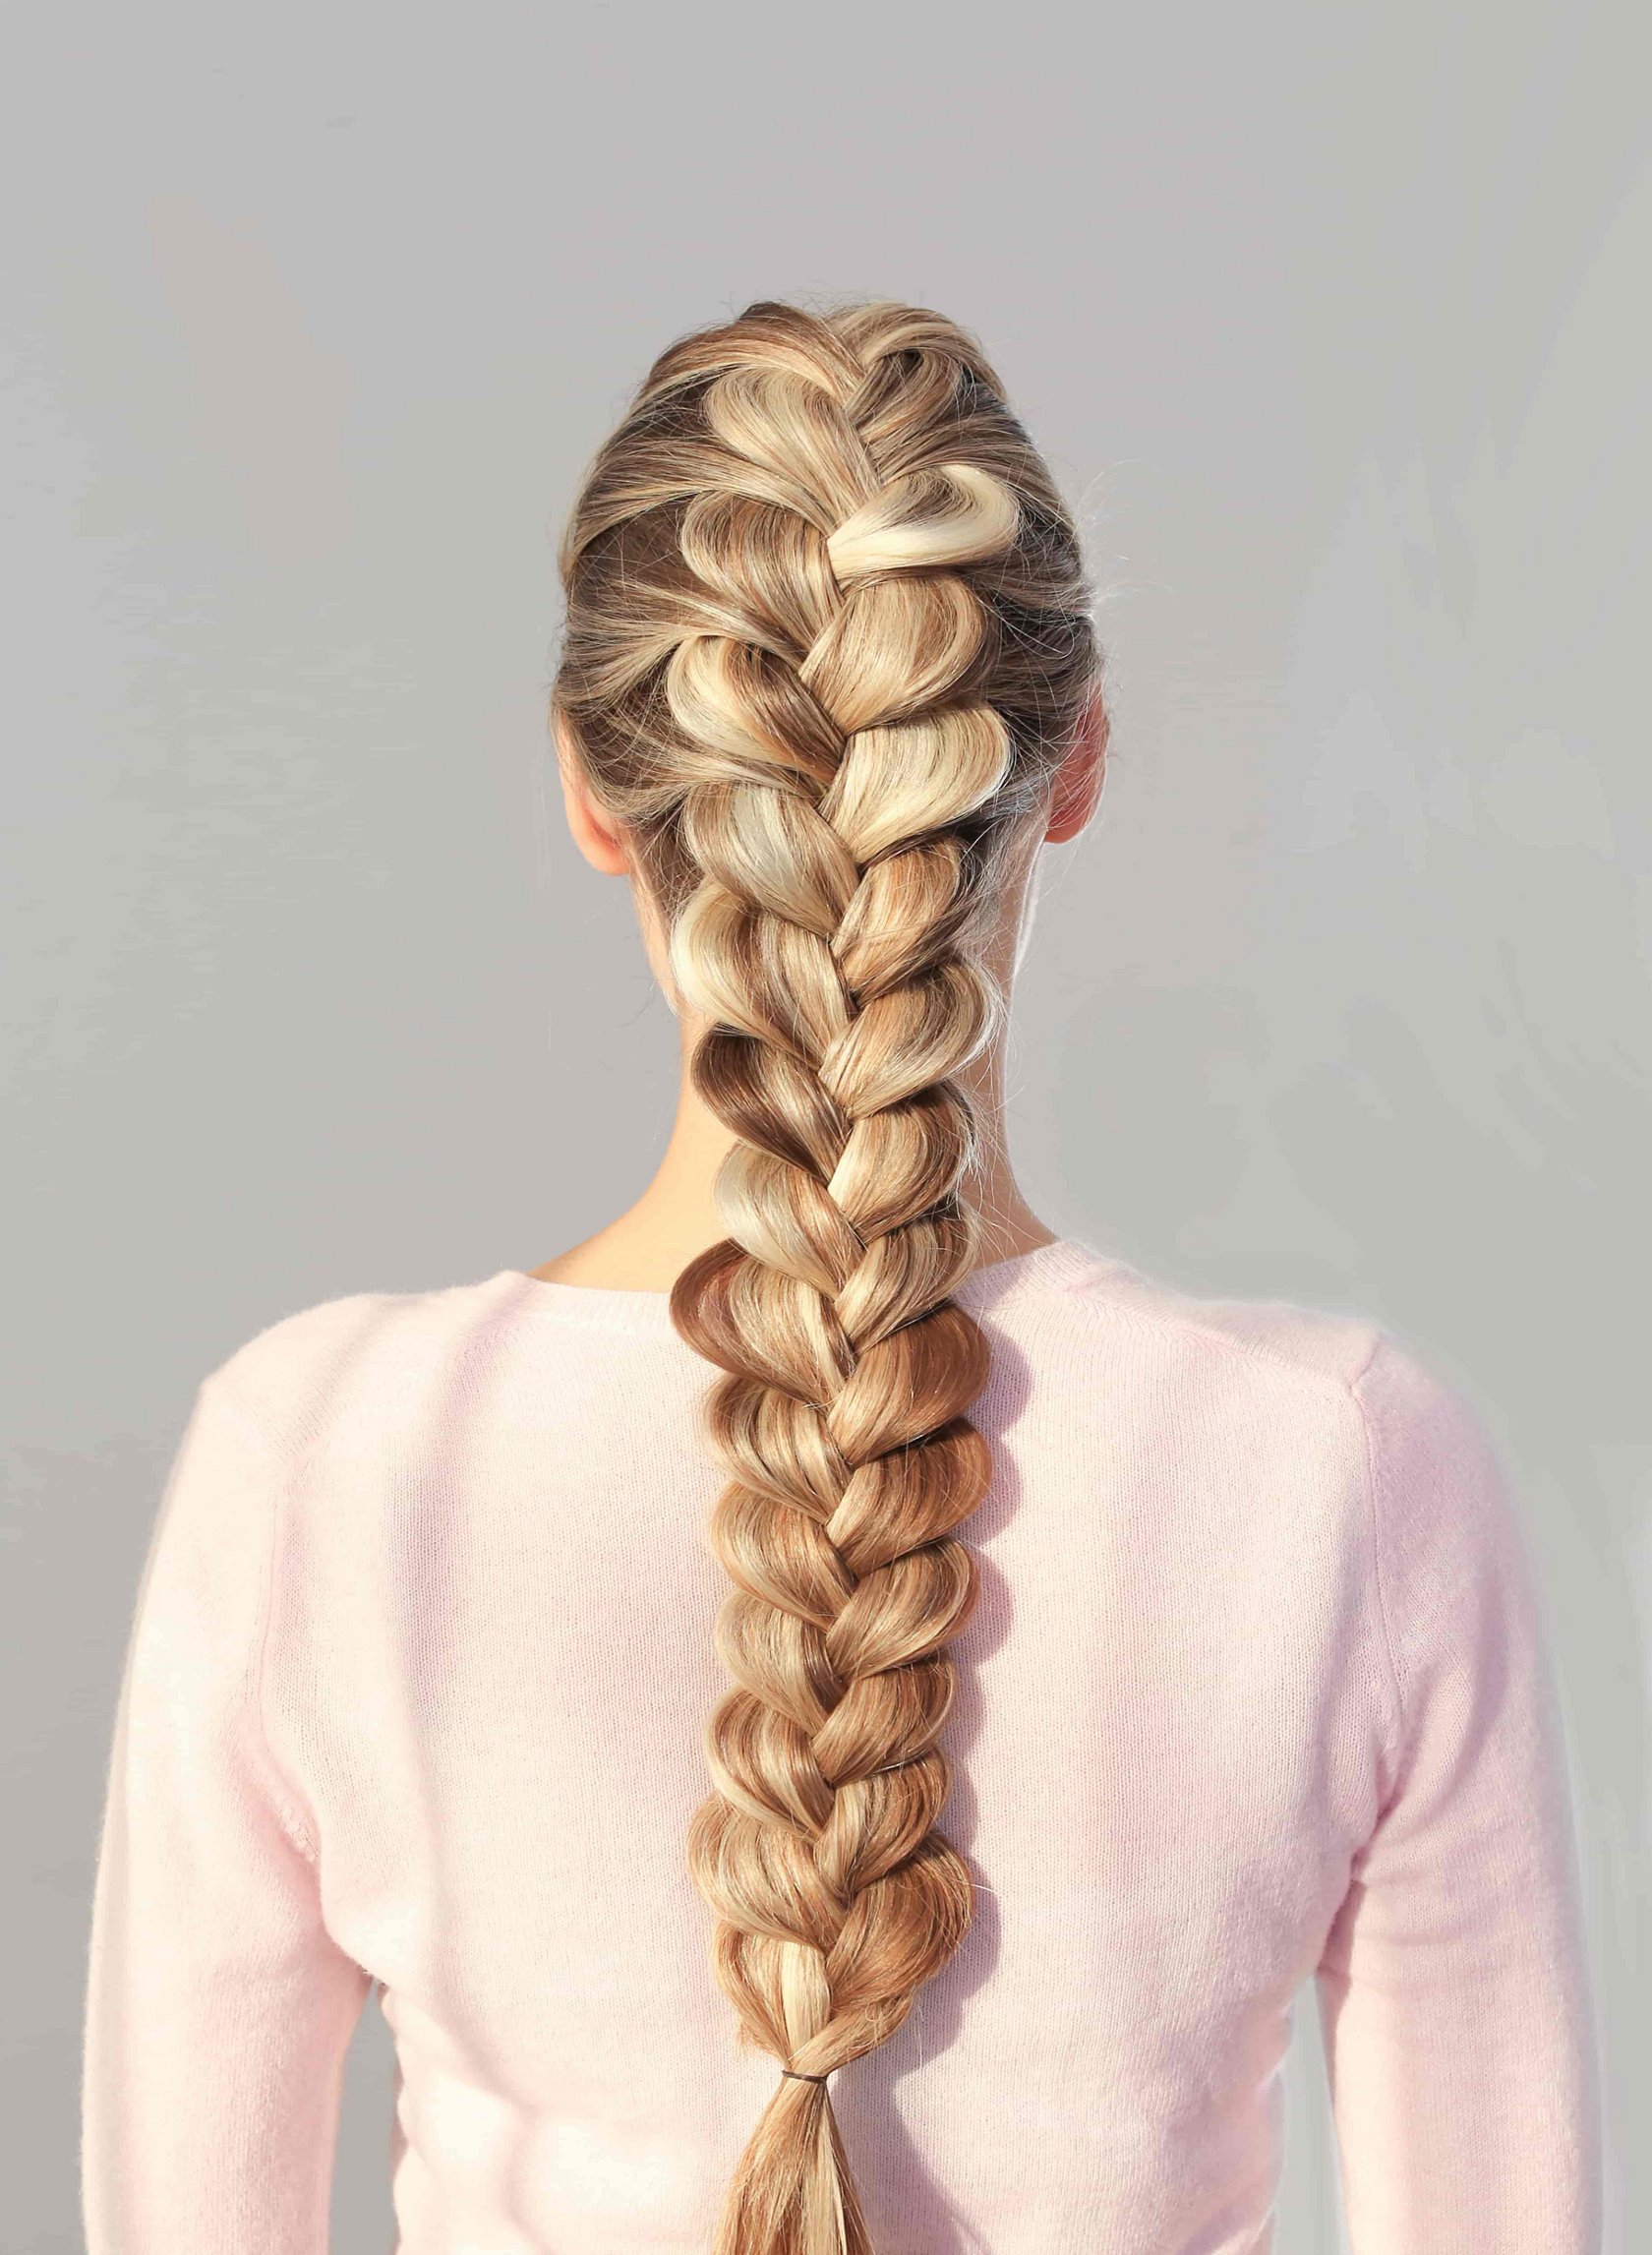 10 Braided Hairstyles To Try This Year